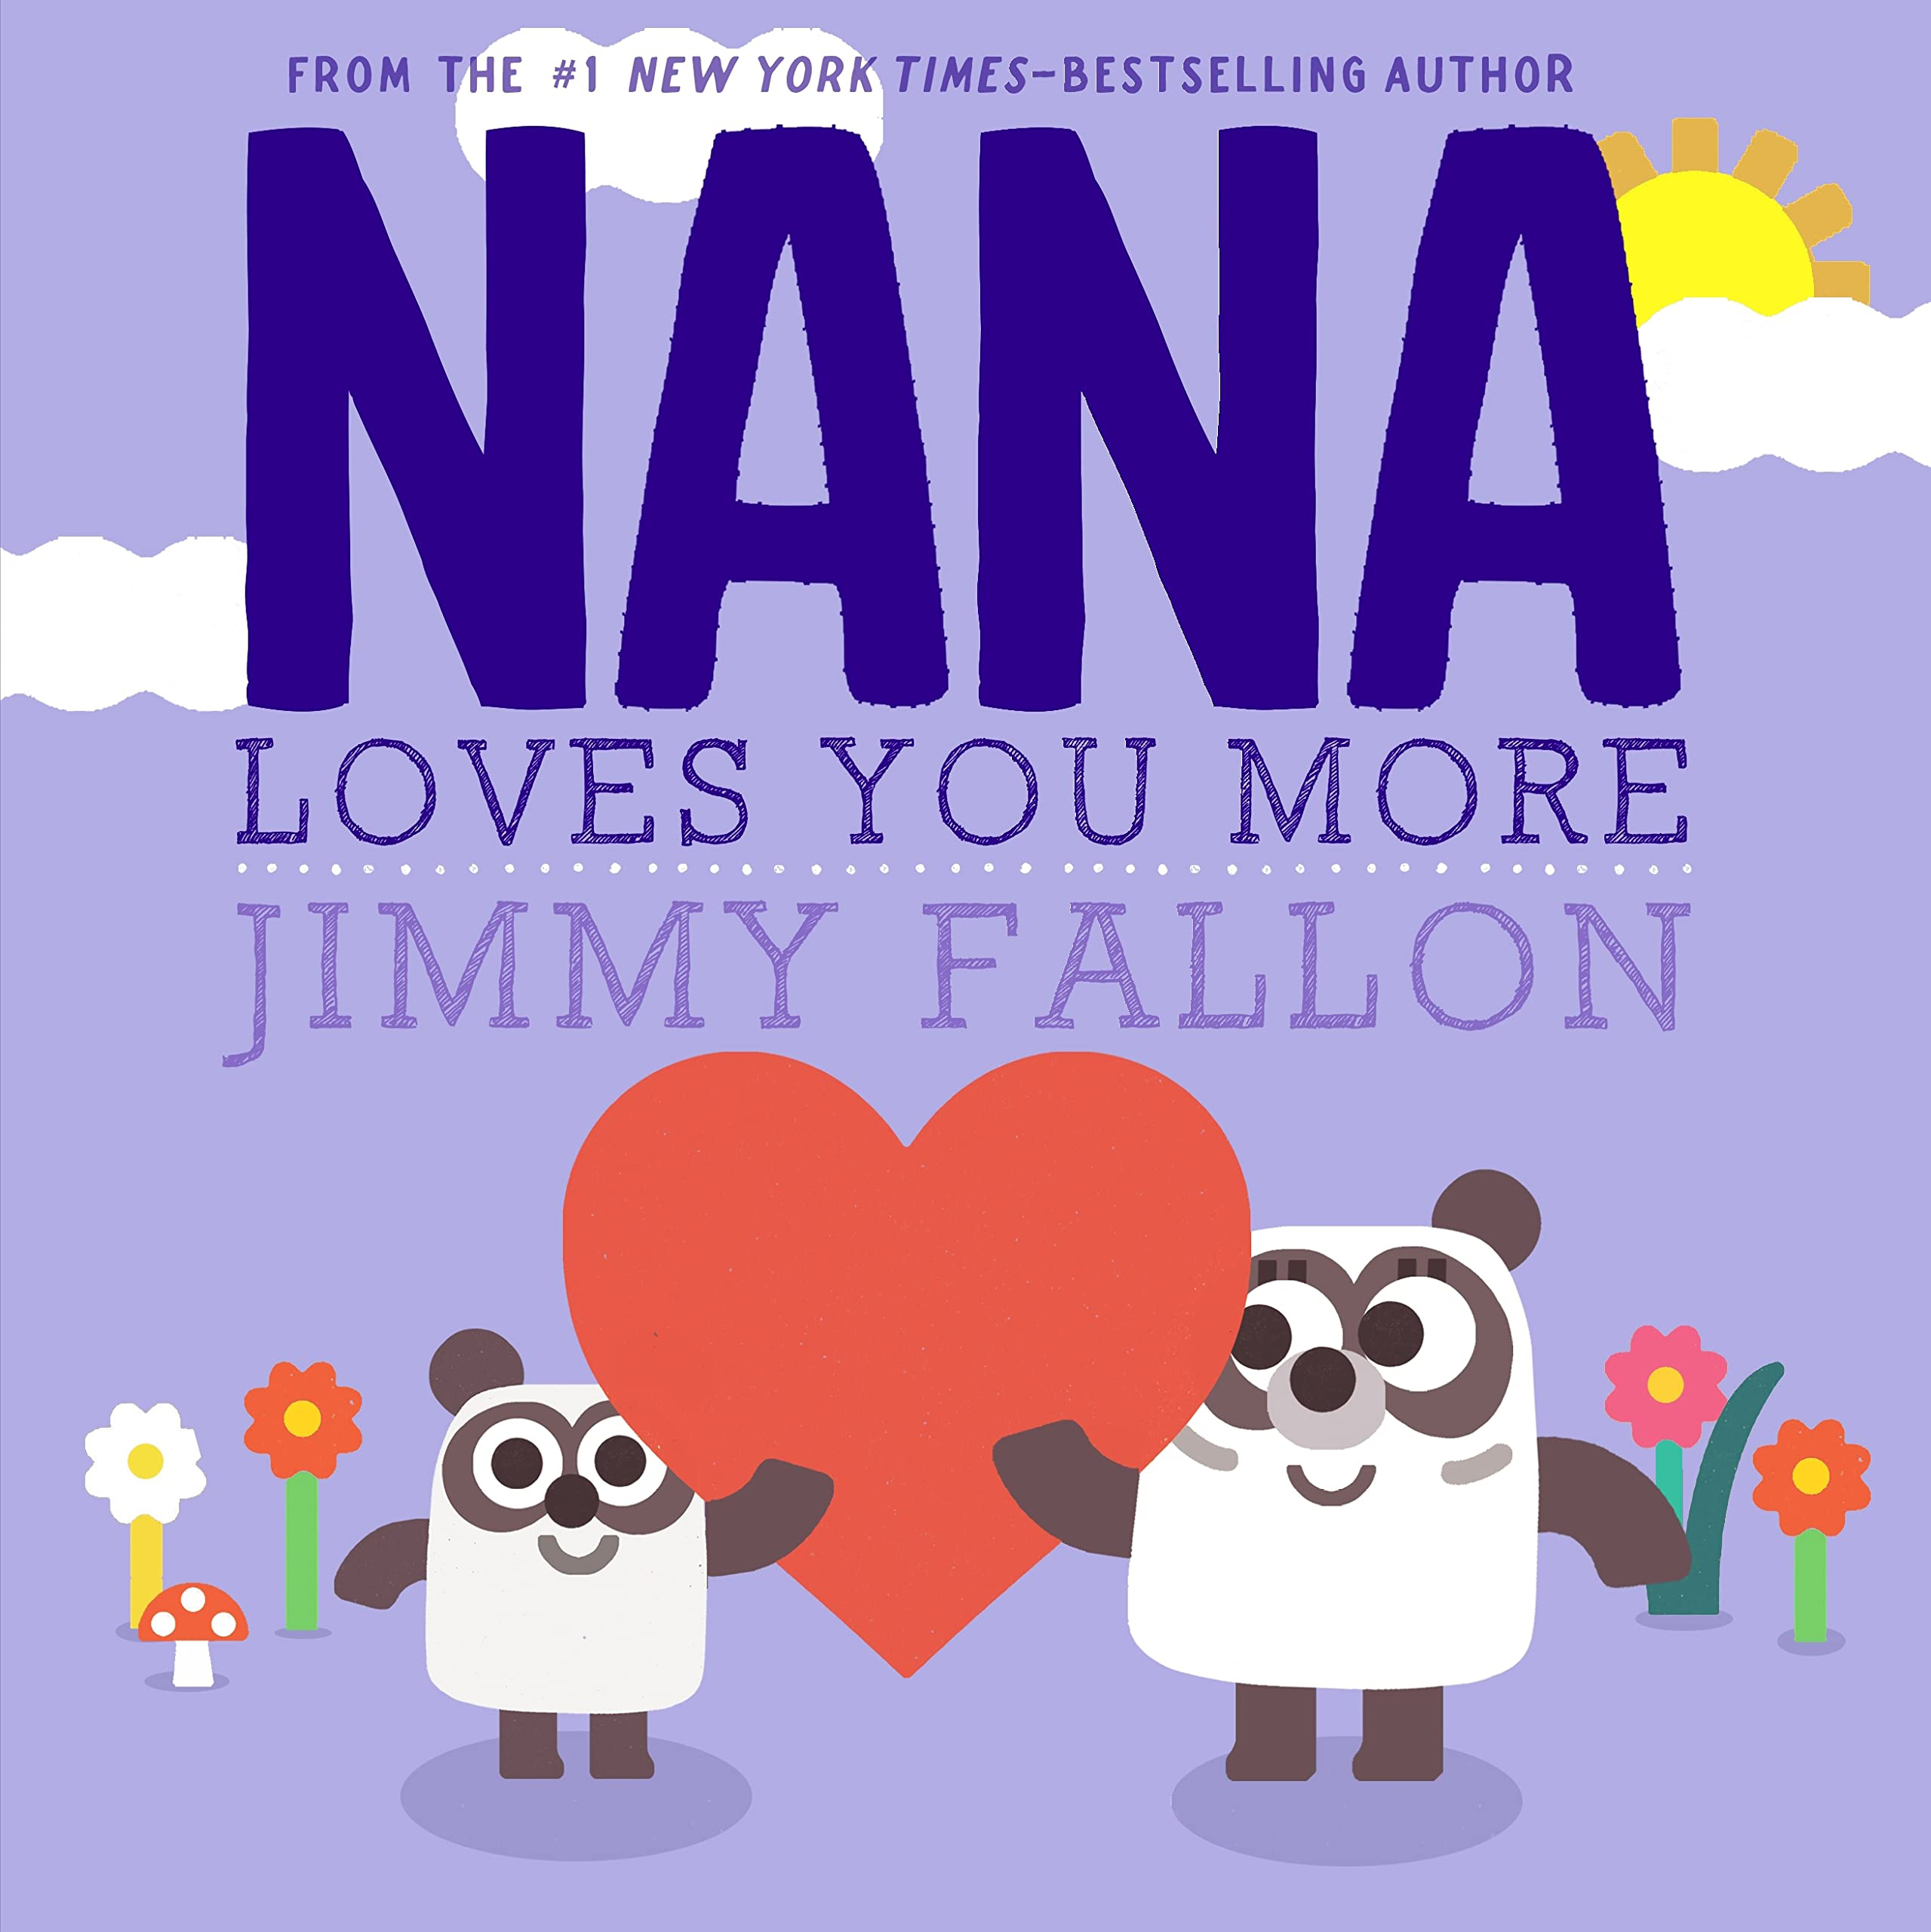 Cover of "Nana Loves You More" by Jimmy Fallon